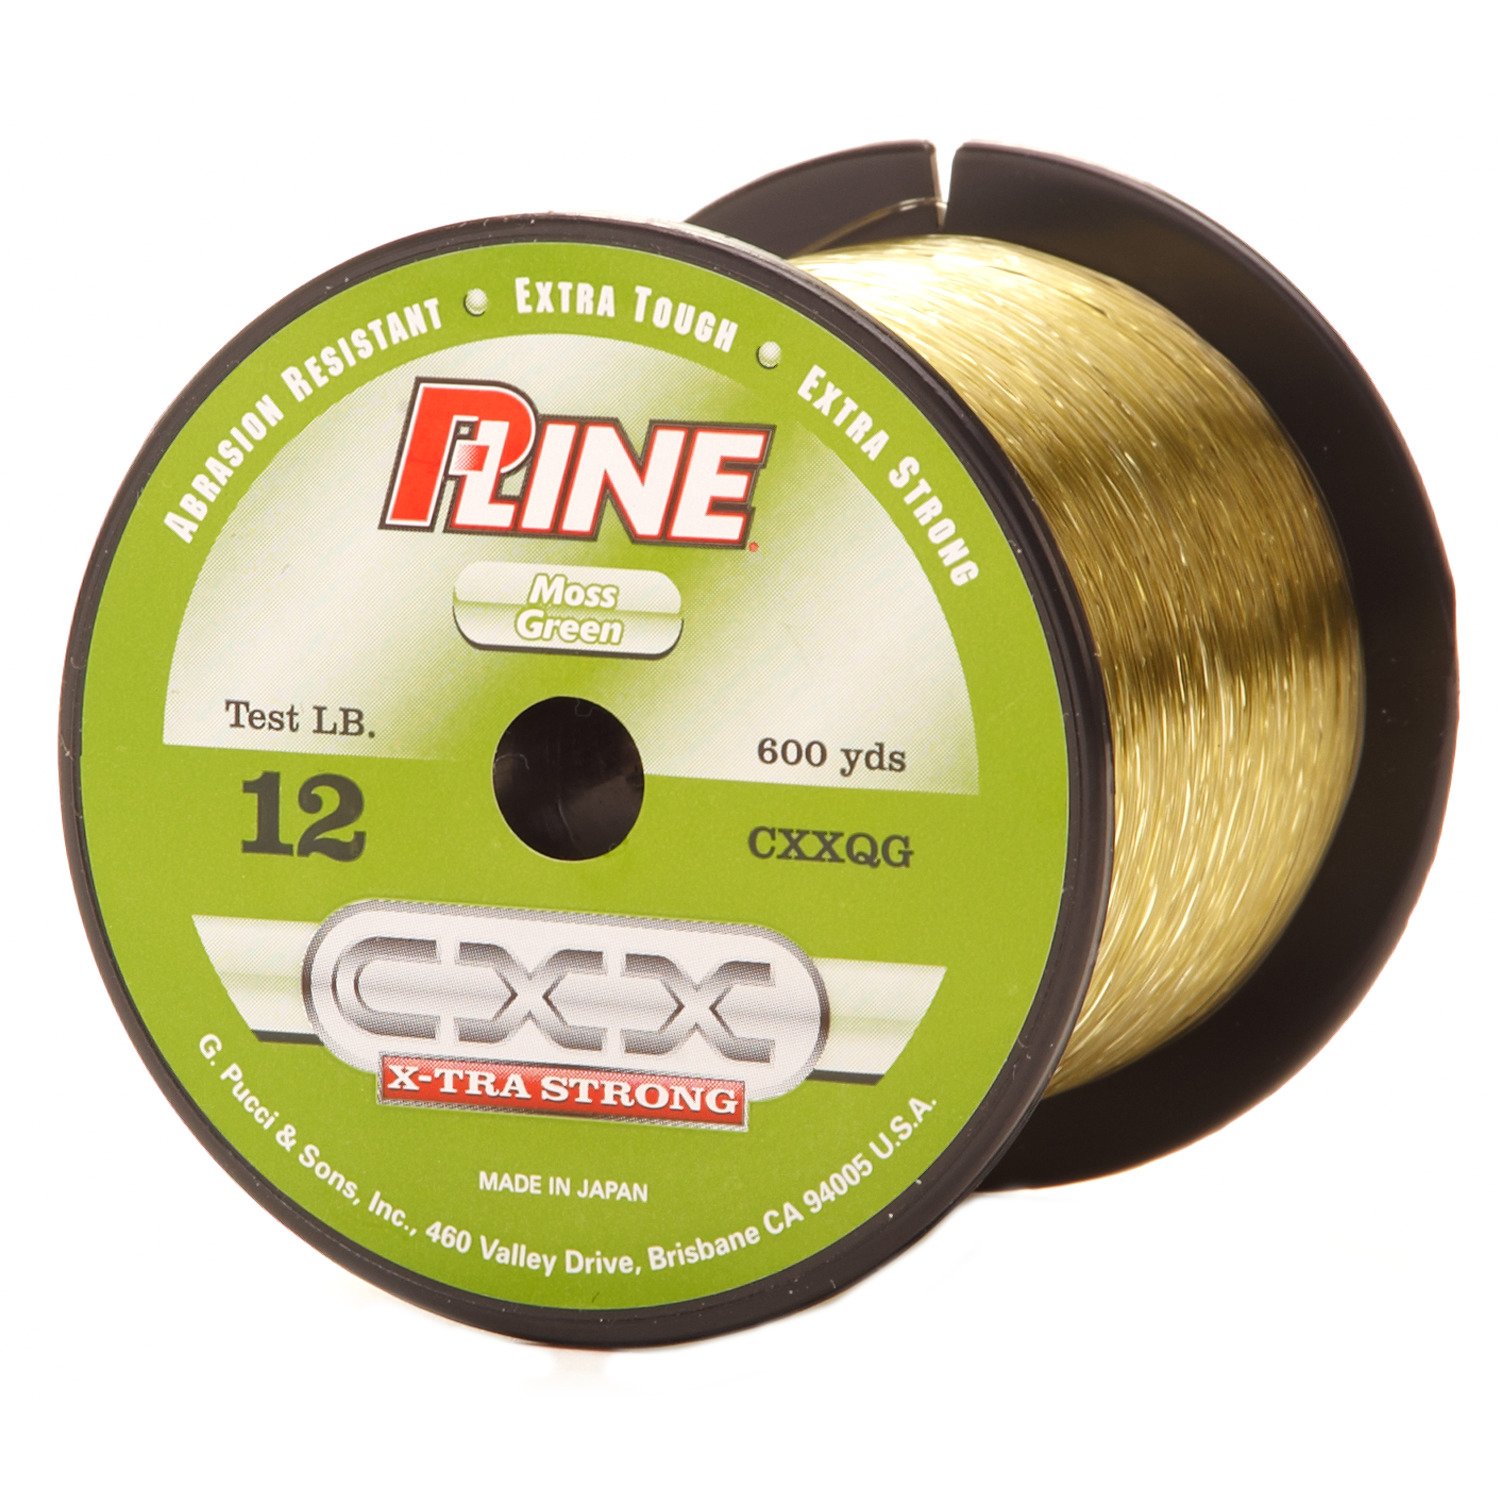 P-Line Tactical Fluorocarbon Fishing Line 20 LB Test 200 Yd Spool